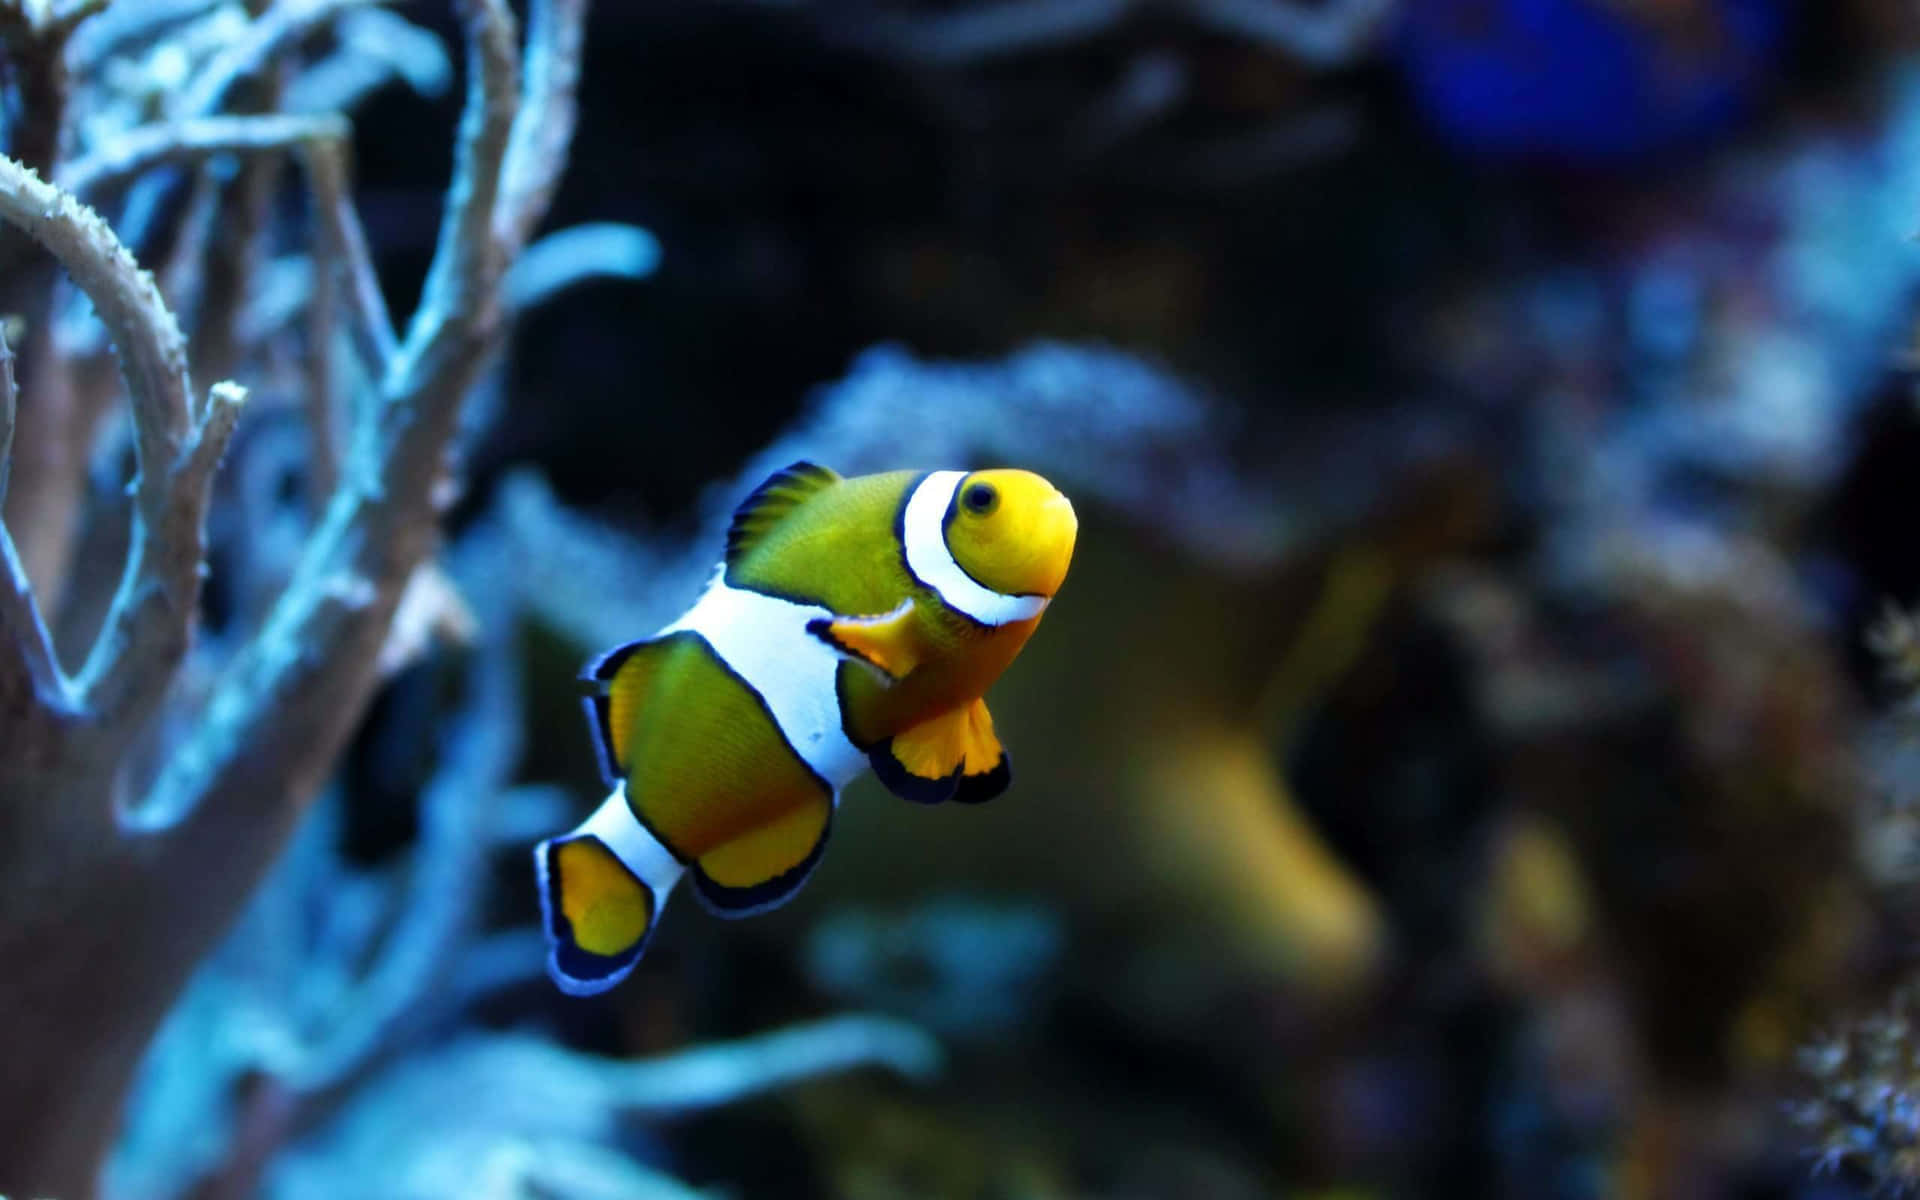 Catch a glimpse of a brightly-colored fish in the underwater depths